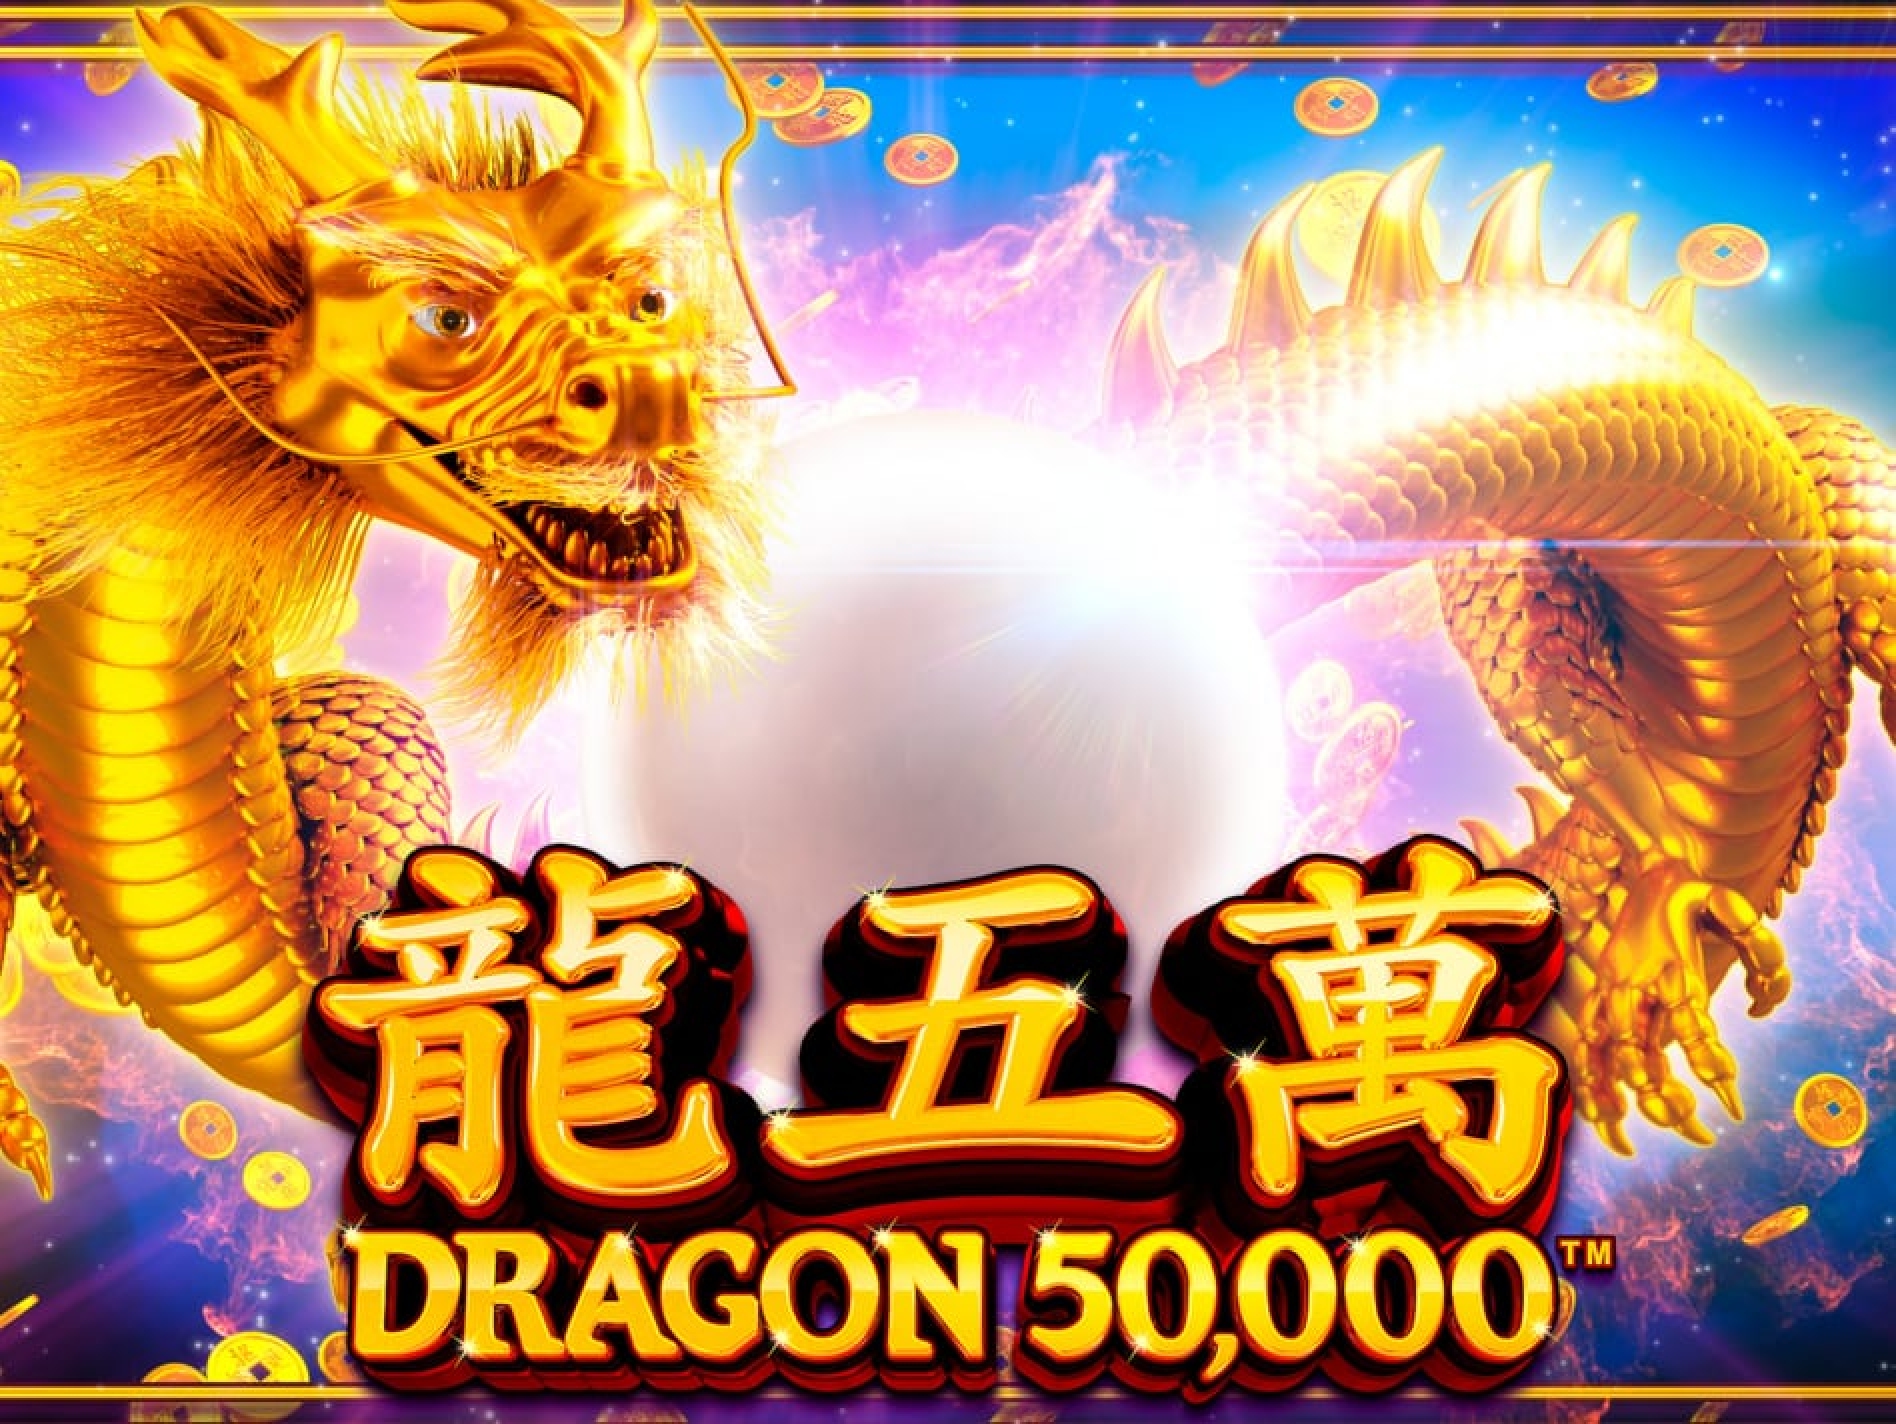 The Dragon 50000 Online Slot Demo Game by Chance Interactive